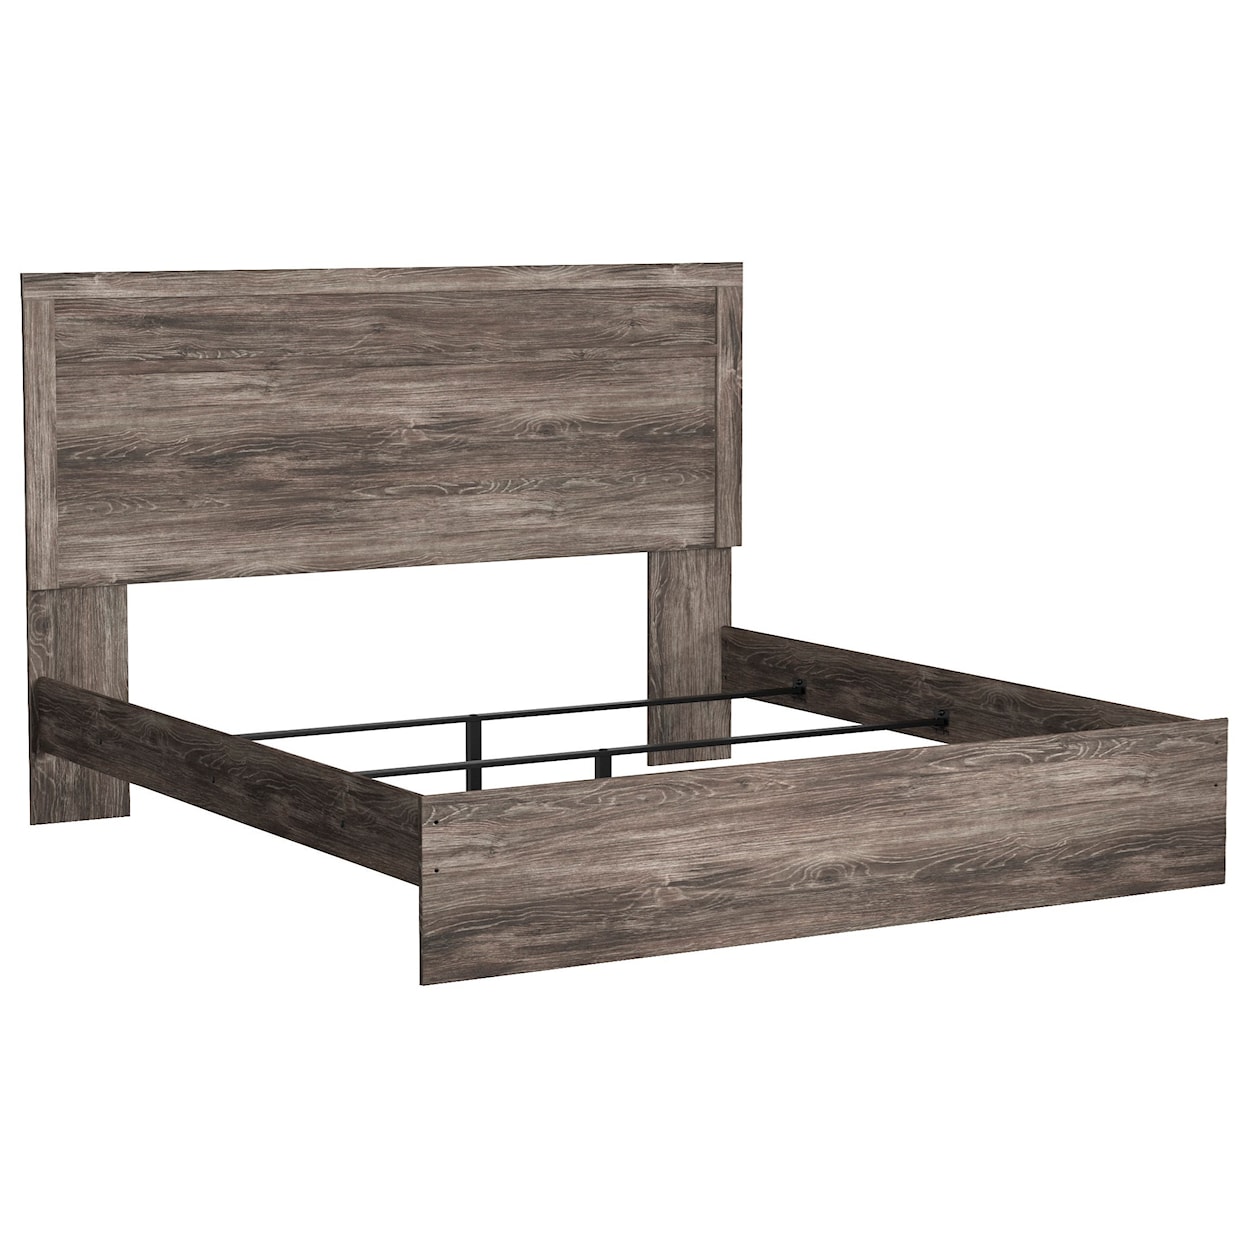 Signature Design by Ashley Ralinksi King Panel Bed